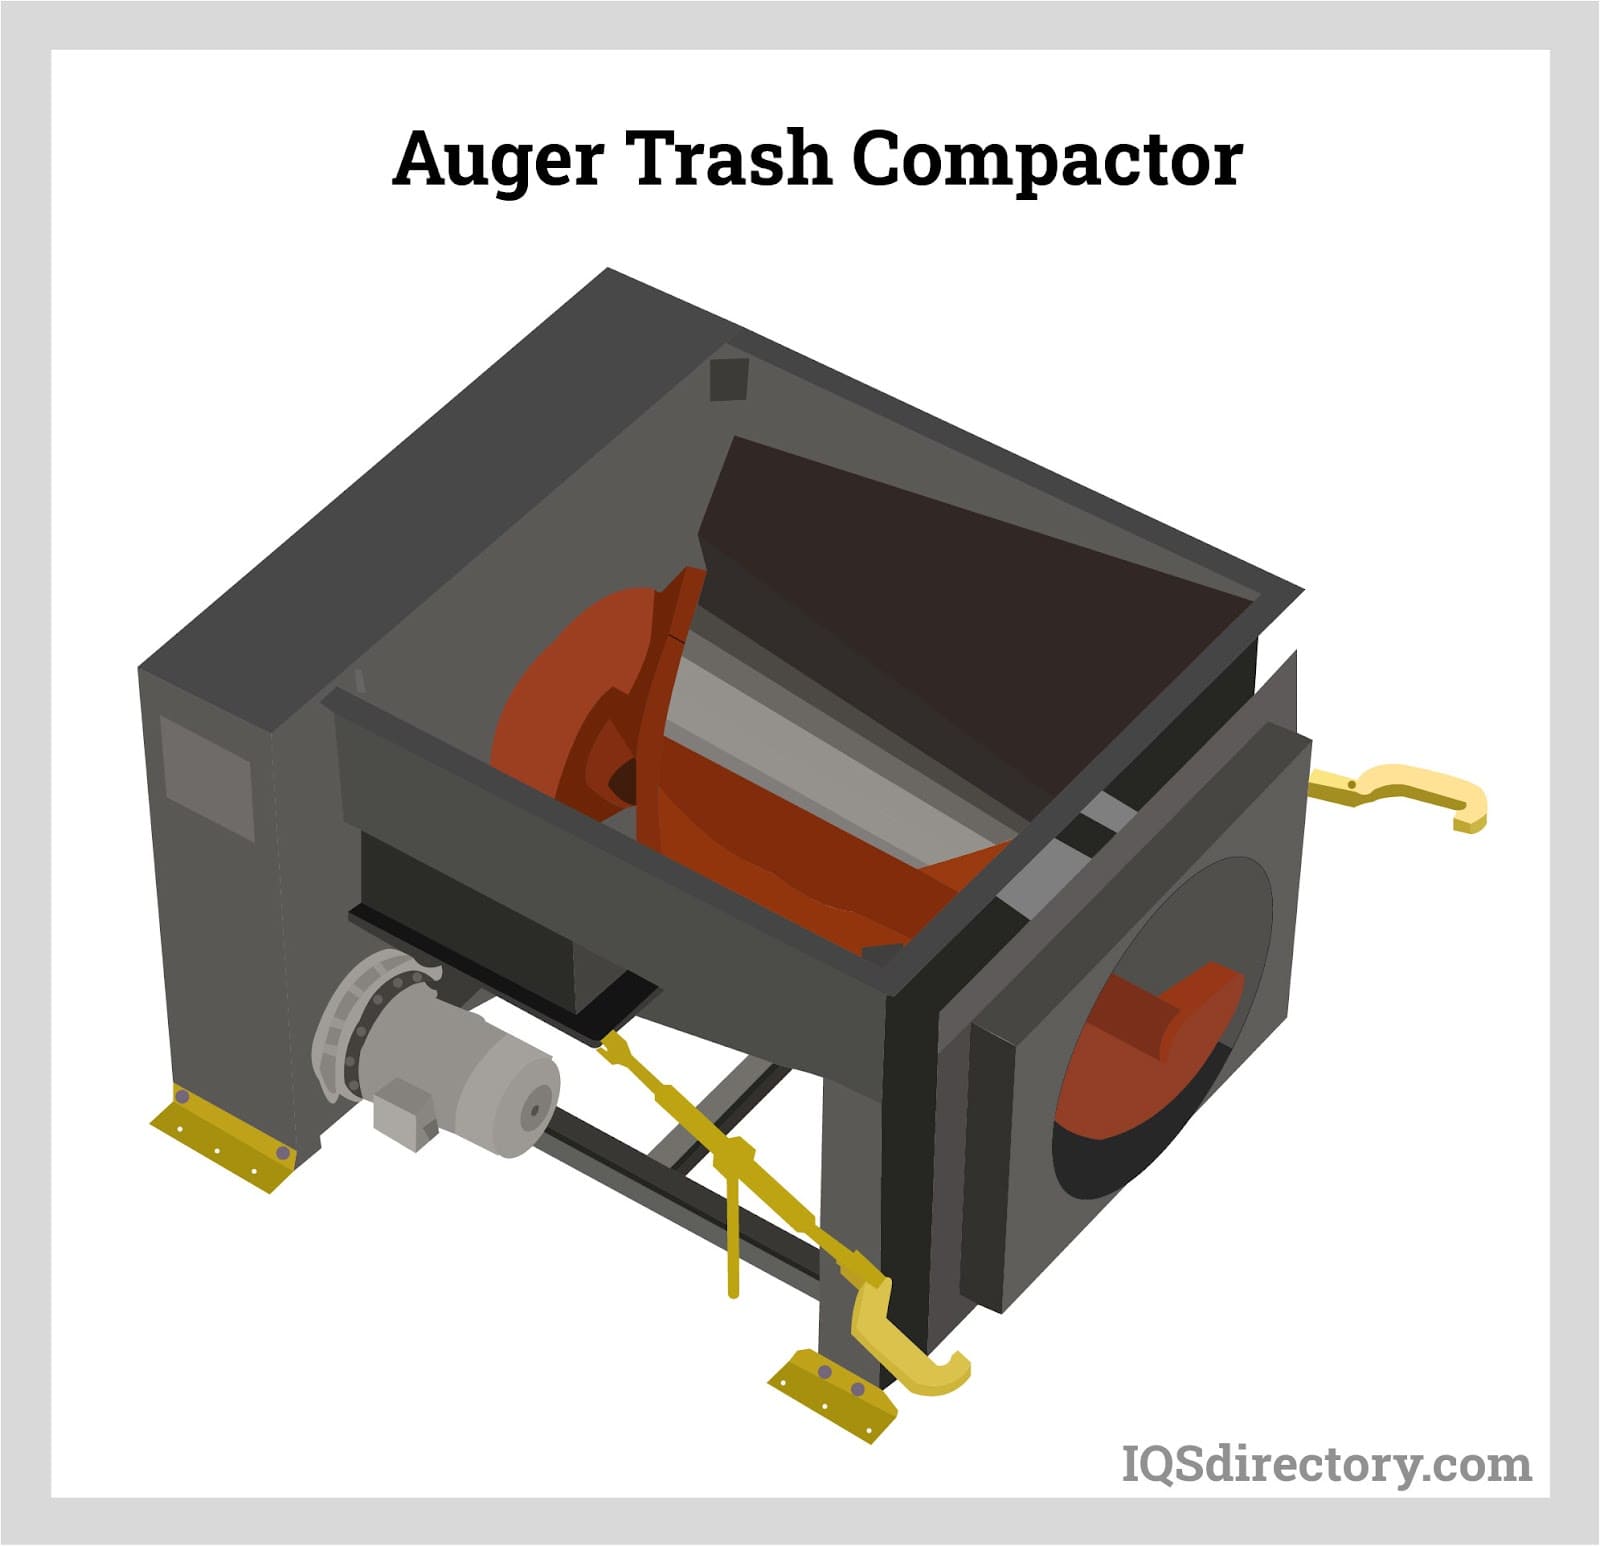 Metal Shredders: Types, Uses, Features and Benefits